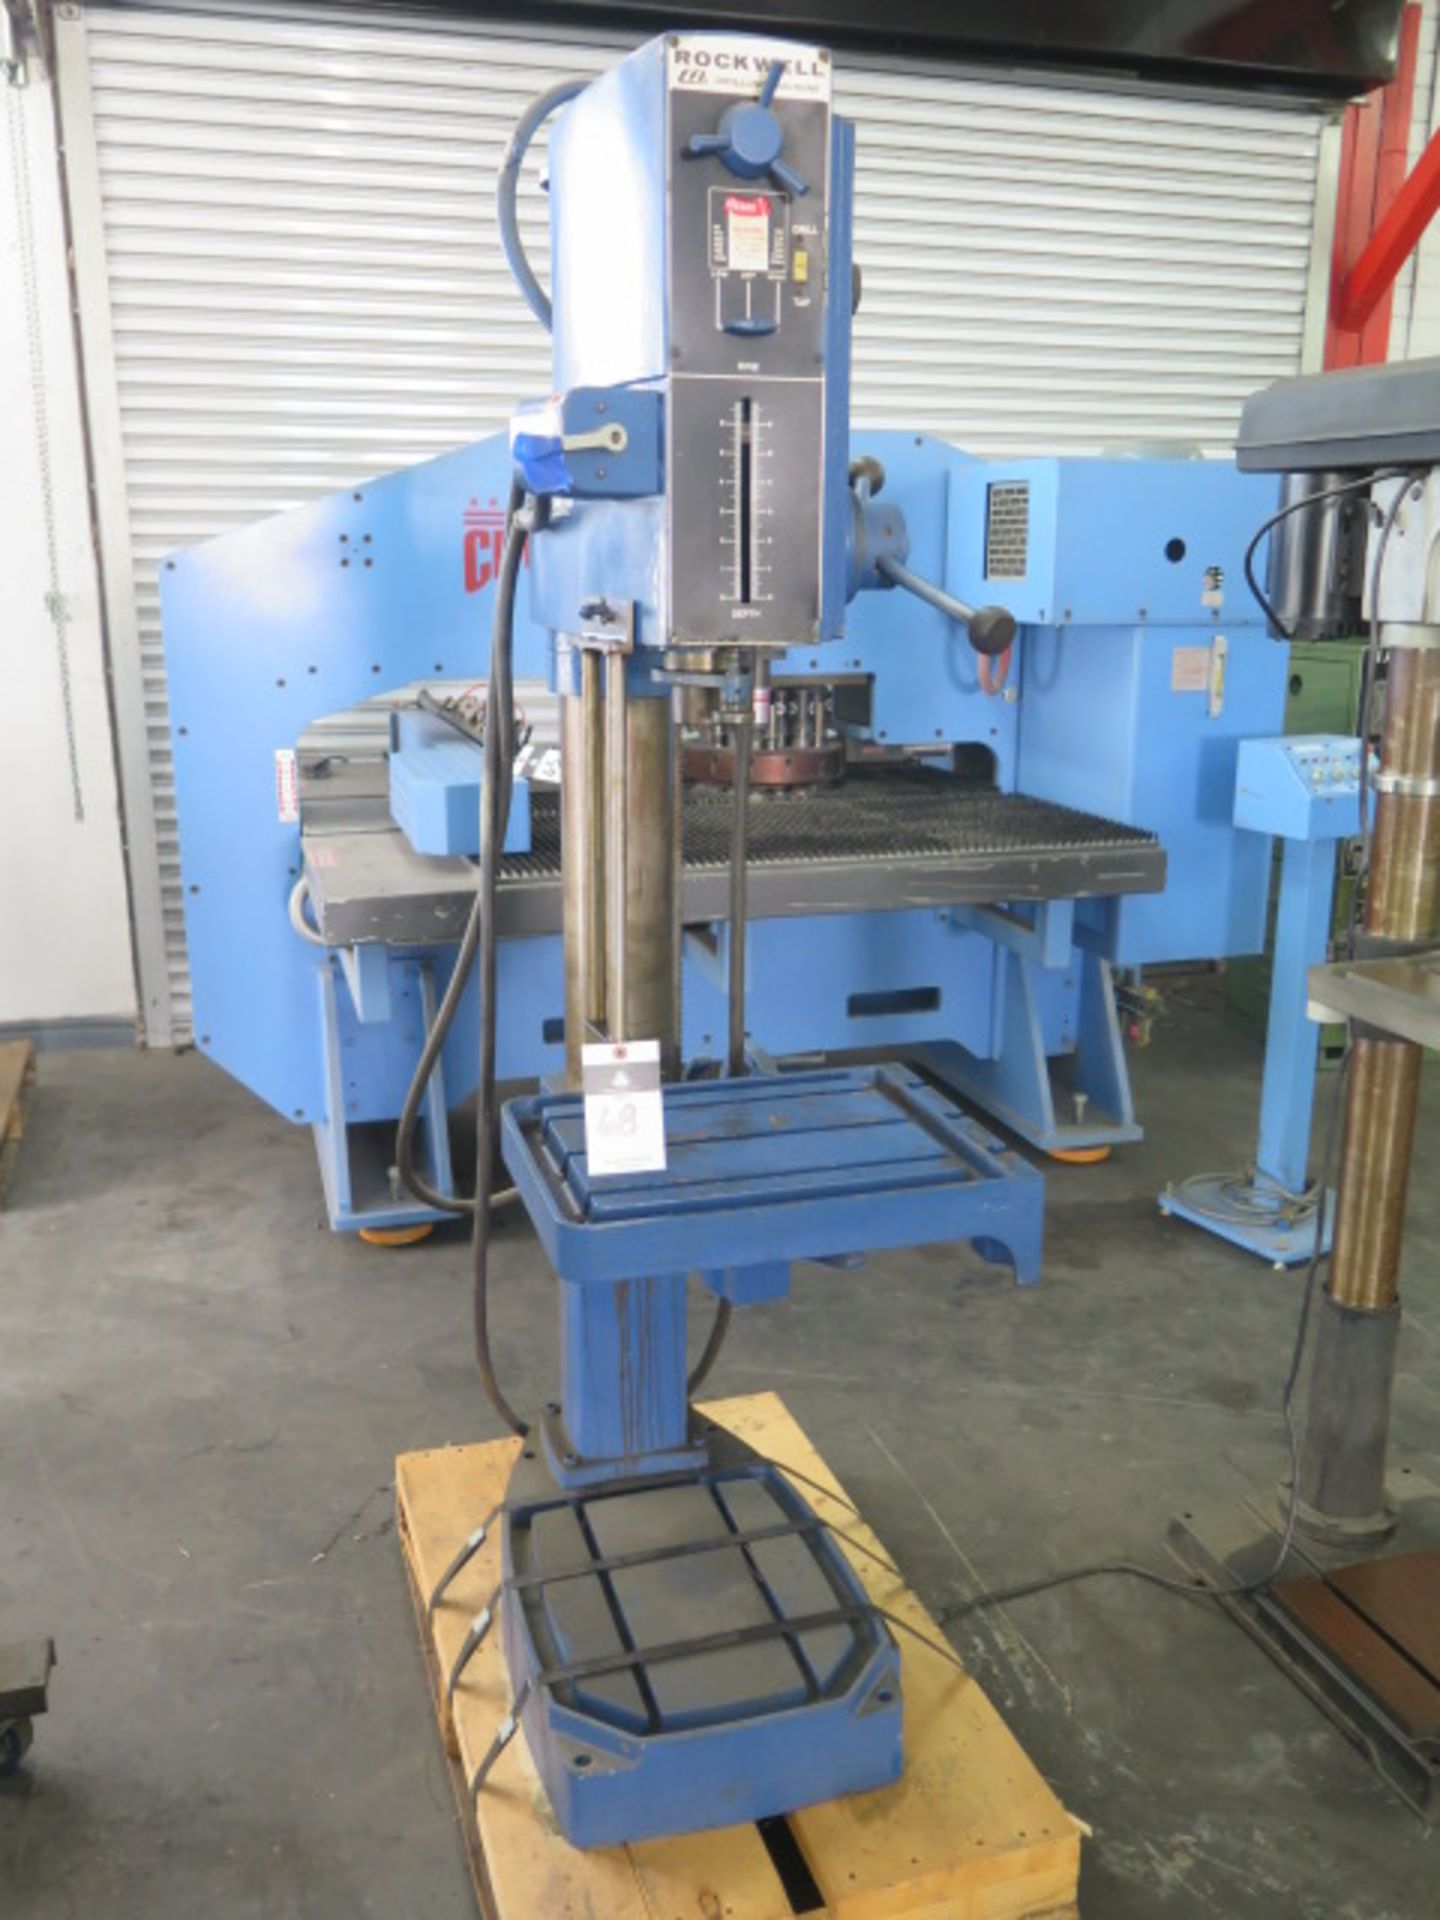 Rockwell Power Drilling / Tapping Machine